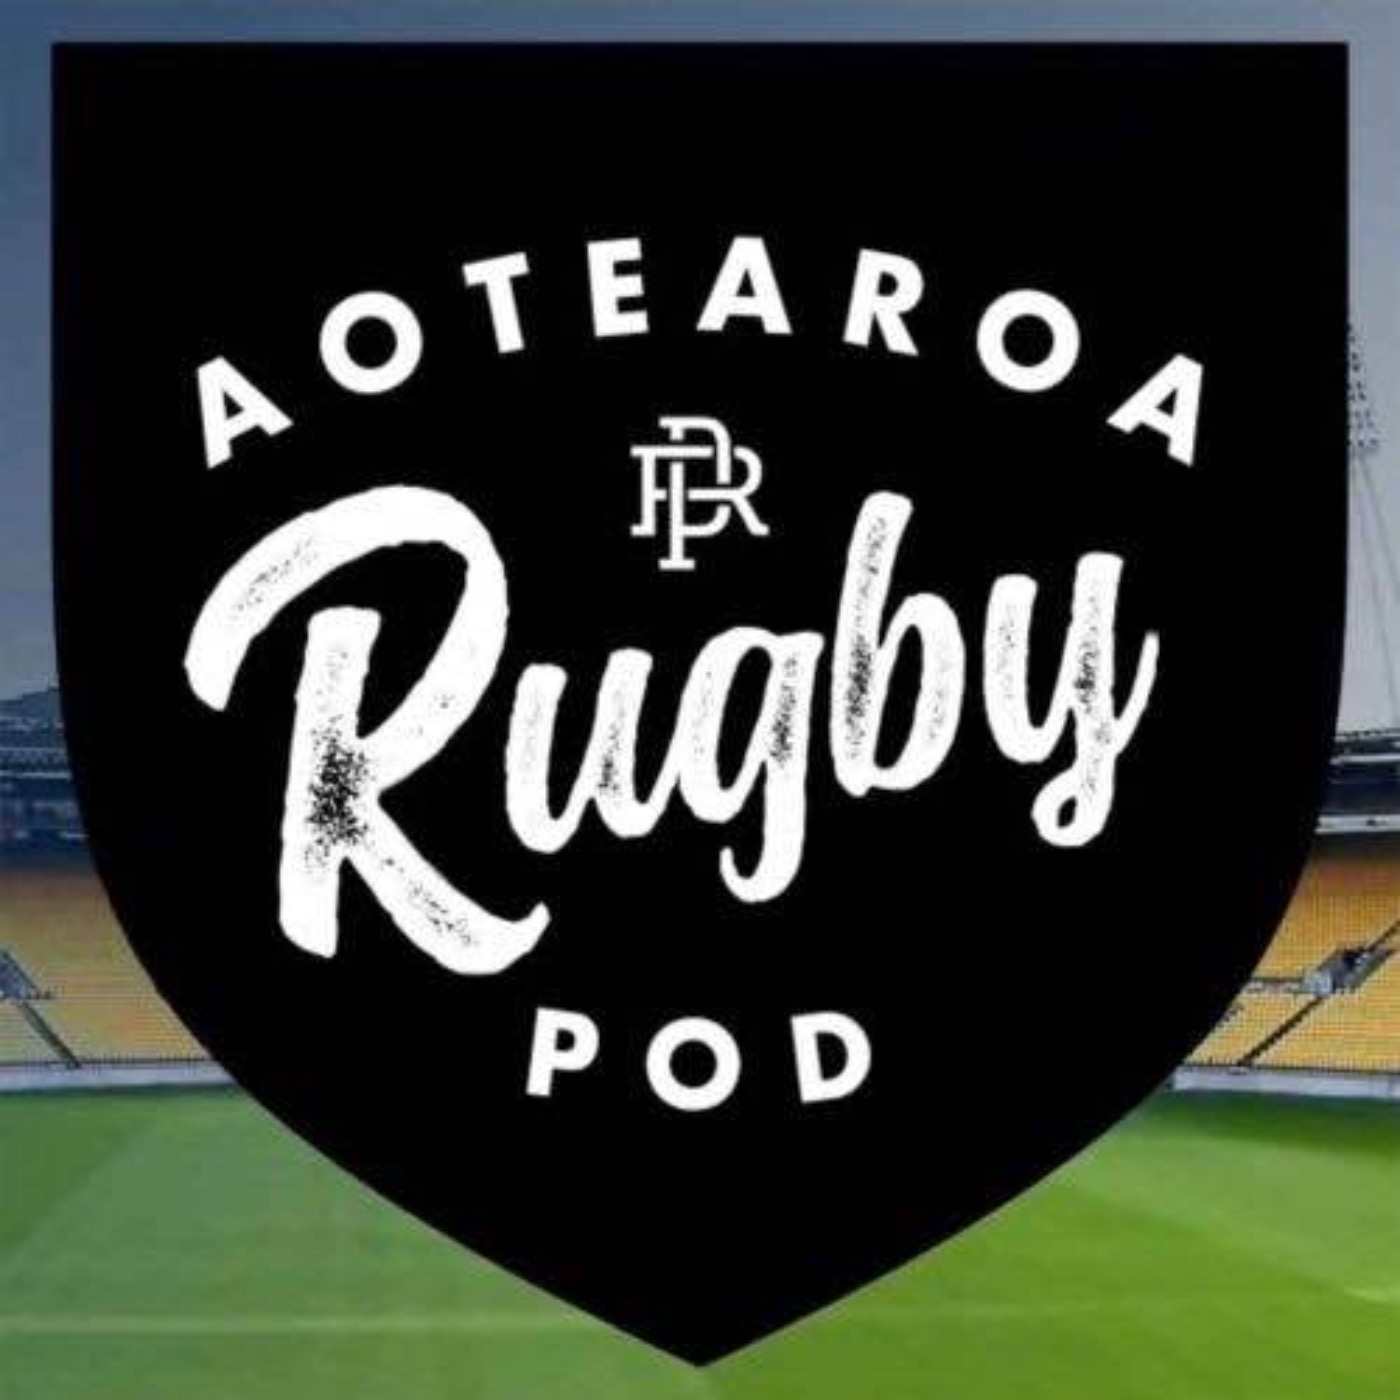 Debating Super Rugby’s best fullback and reacting to round one